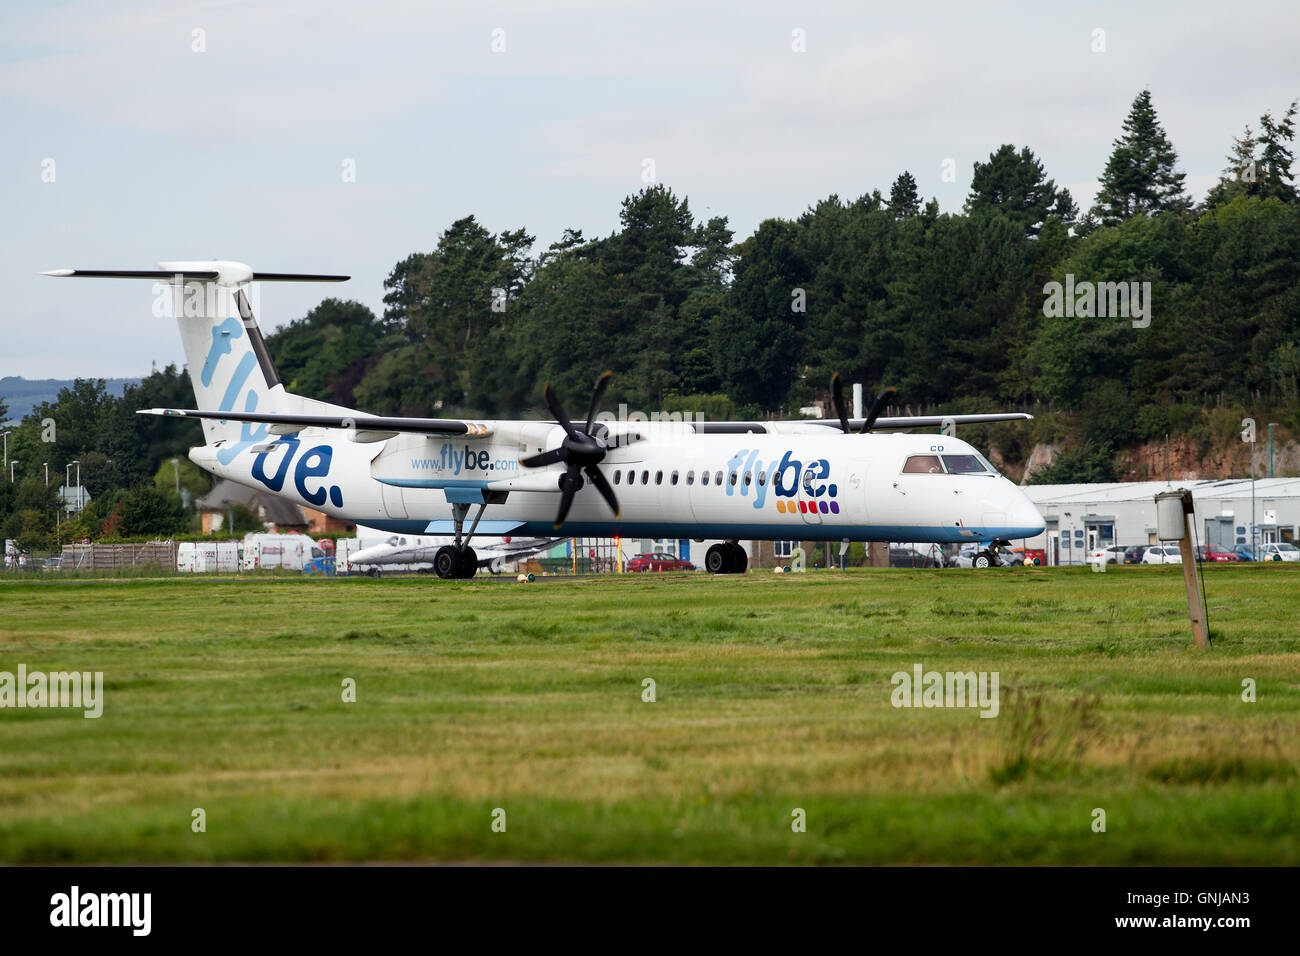 A twin engine turboprop Flybe Dash-8 aircraft has just landed at the Dundee Airport, UK Stock Photo